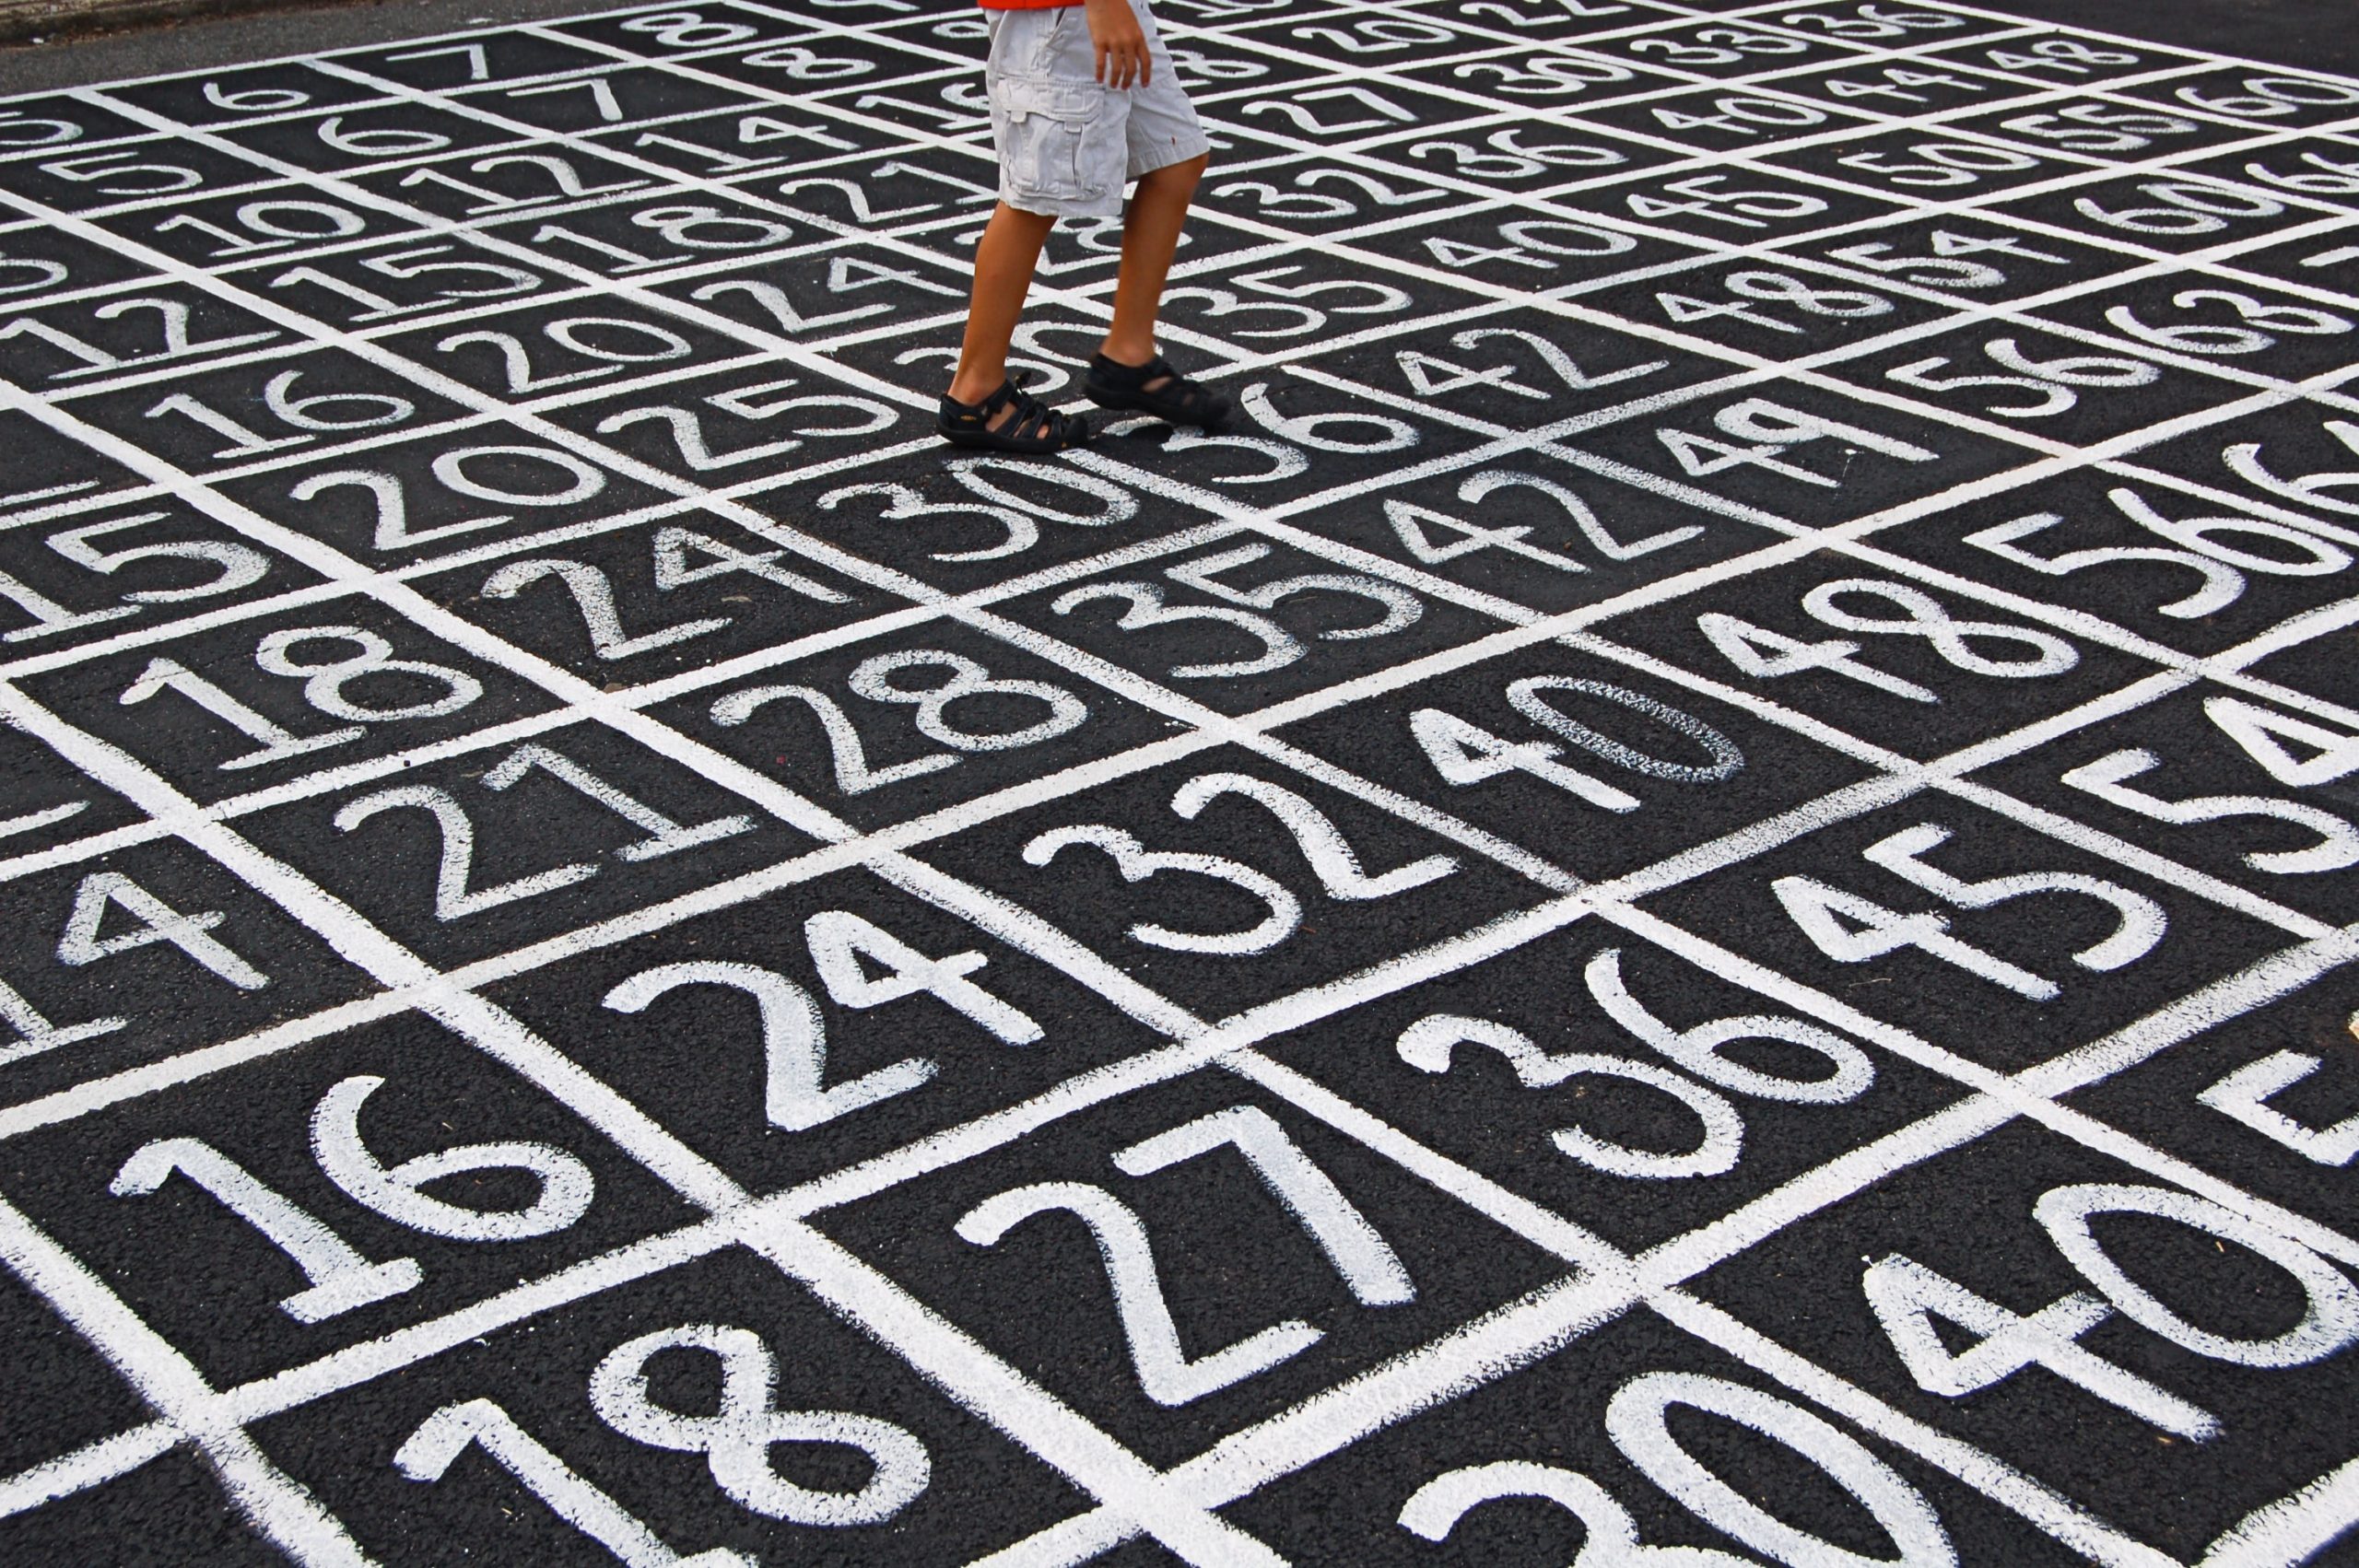 Person in shorts walking across white numbers painted on tarmac.